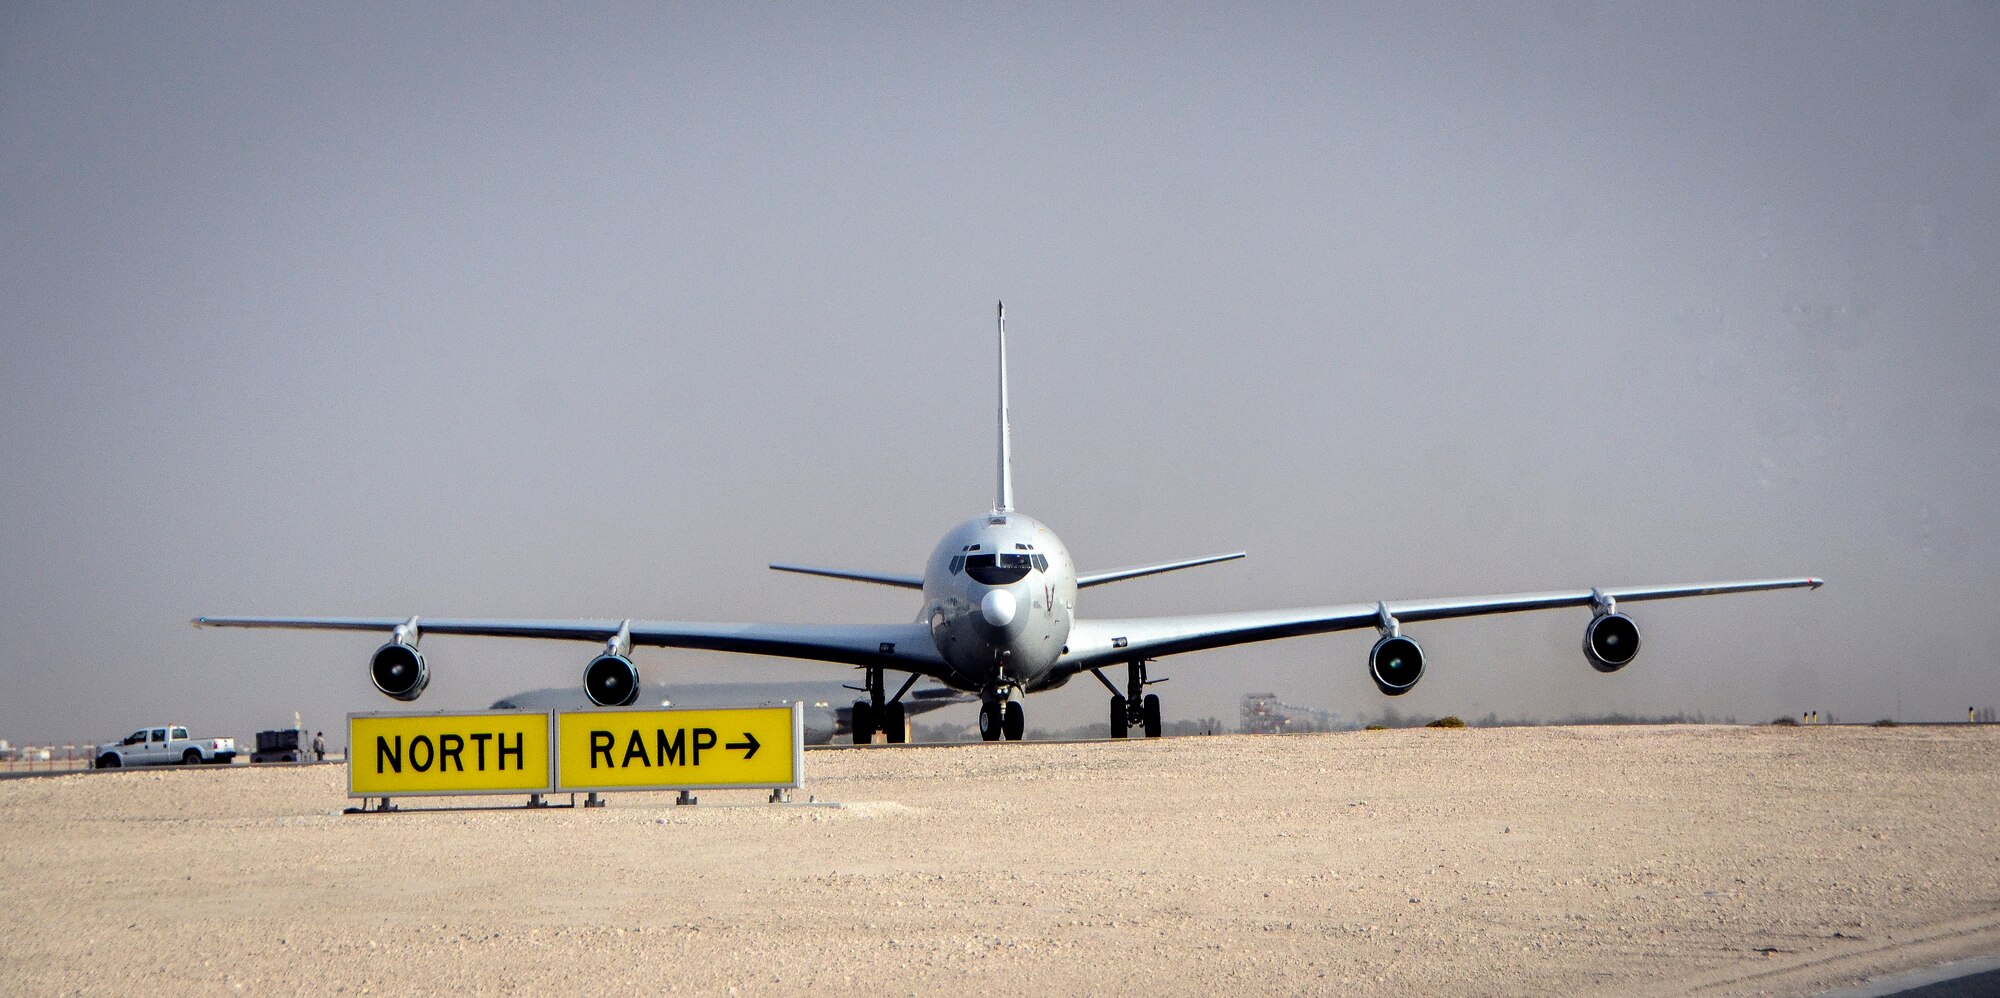 An E-8C Joint Surveillance Target Attack Radar System approaches the runway at Al Udeid Air Base, Qatar, May 1, 2014, after reaching a milestone of 100,000 flying hours to include more than 88,000 hours in the U.S. Central Command area of responsibility since 2001. The JSTARS mission is to provide ground commanders with intelligence, surveillance and reconnaissance air power to boost force protection, defensive operations, over-watch and combat search and rescue missions throughout the AOR.  (U.S. Air Force photo/Senior Airman Jared Trimarchi) 